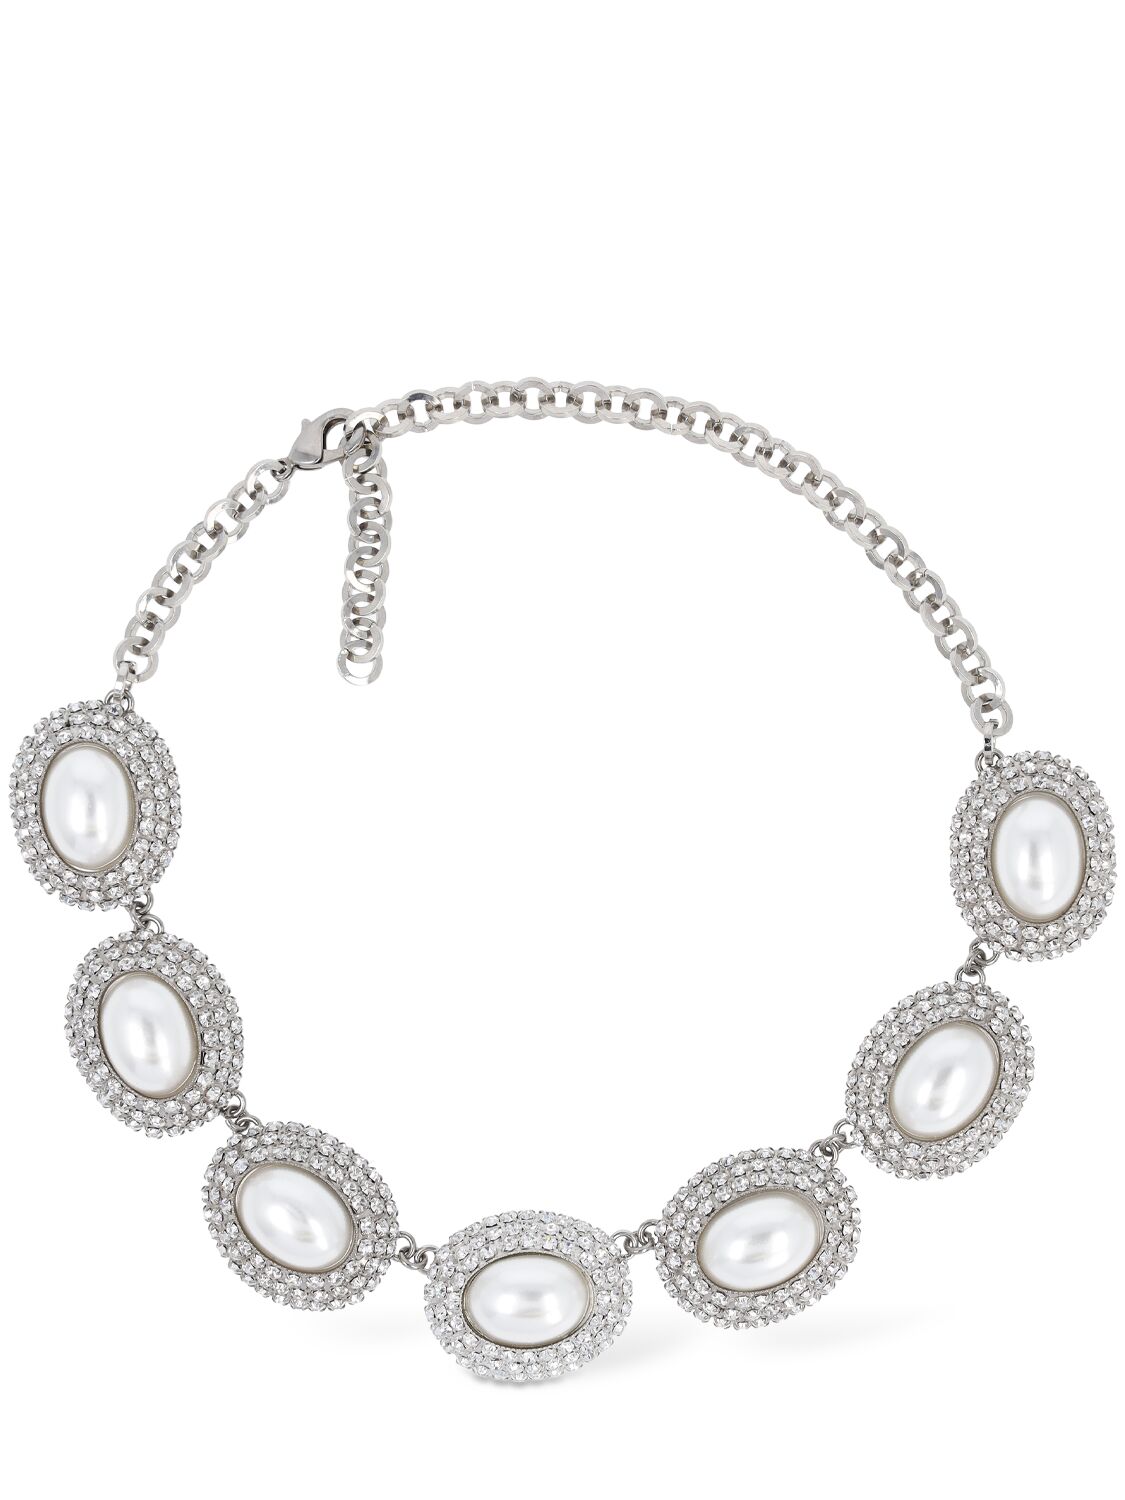 Oval Faux Pearl & Crystal Necklace